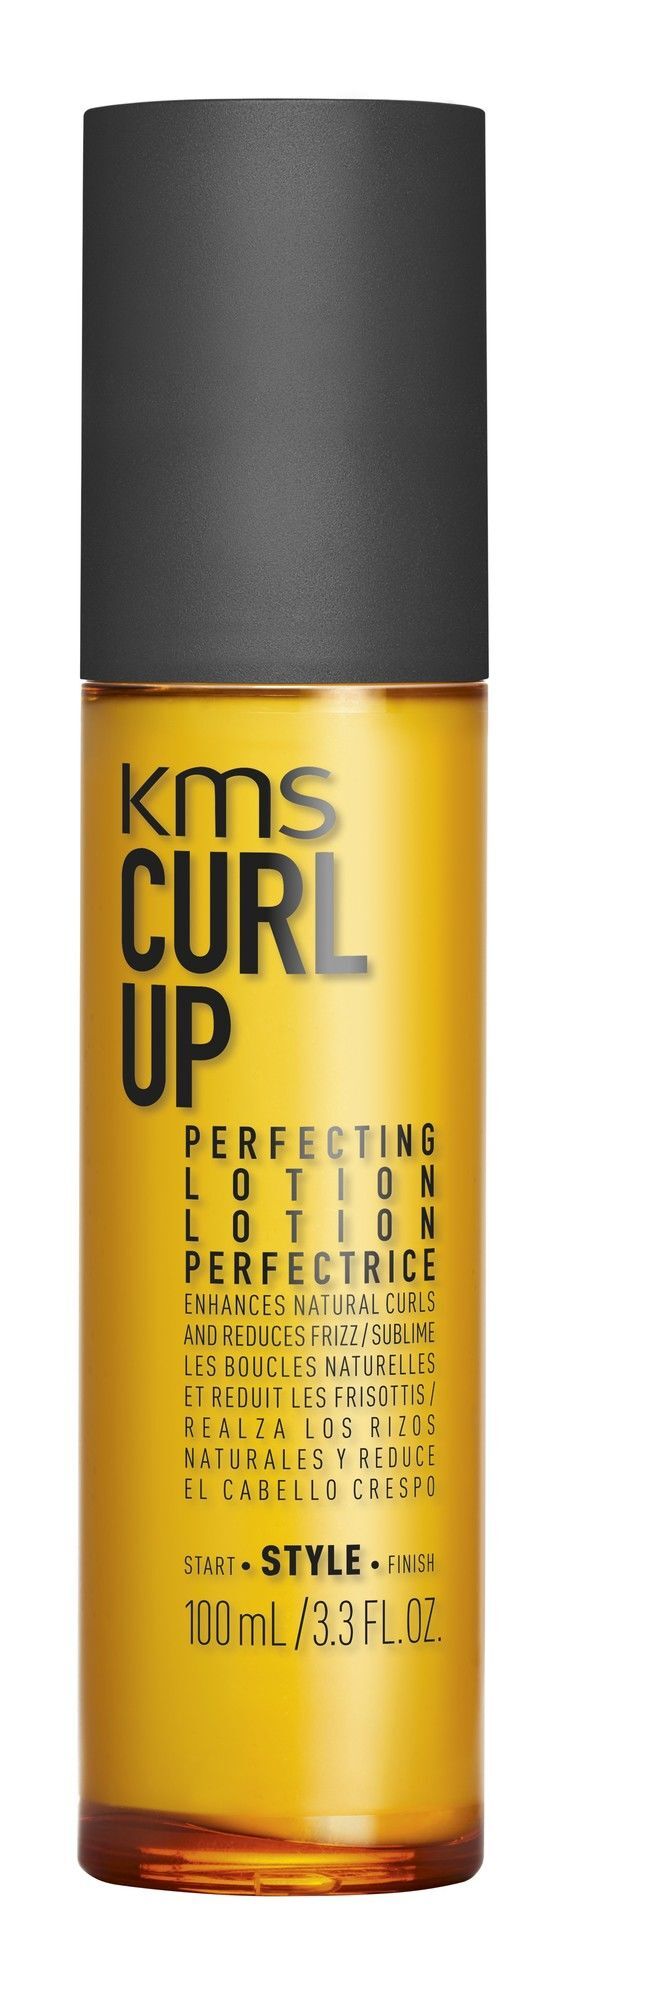 KMS Curlup Perfecting Lotion 100ml